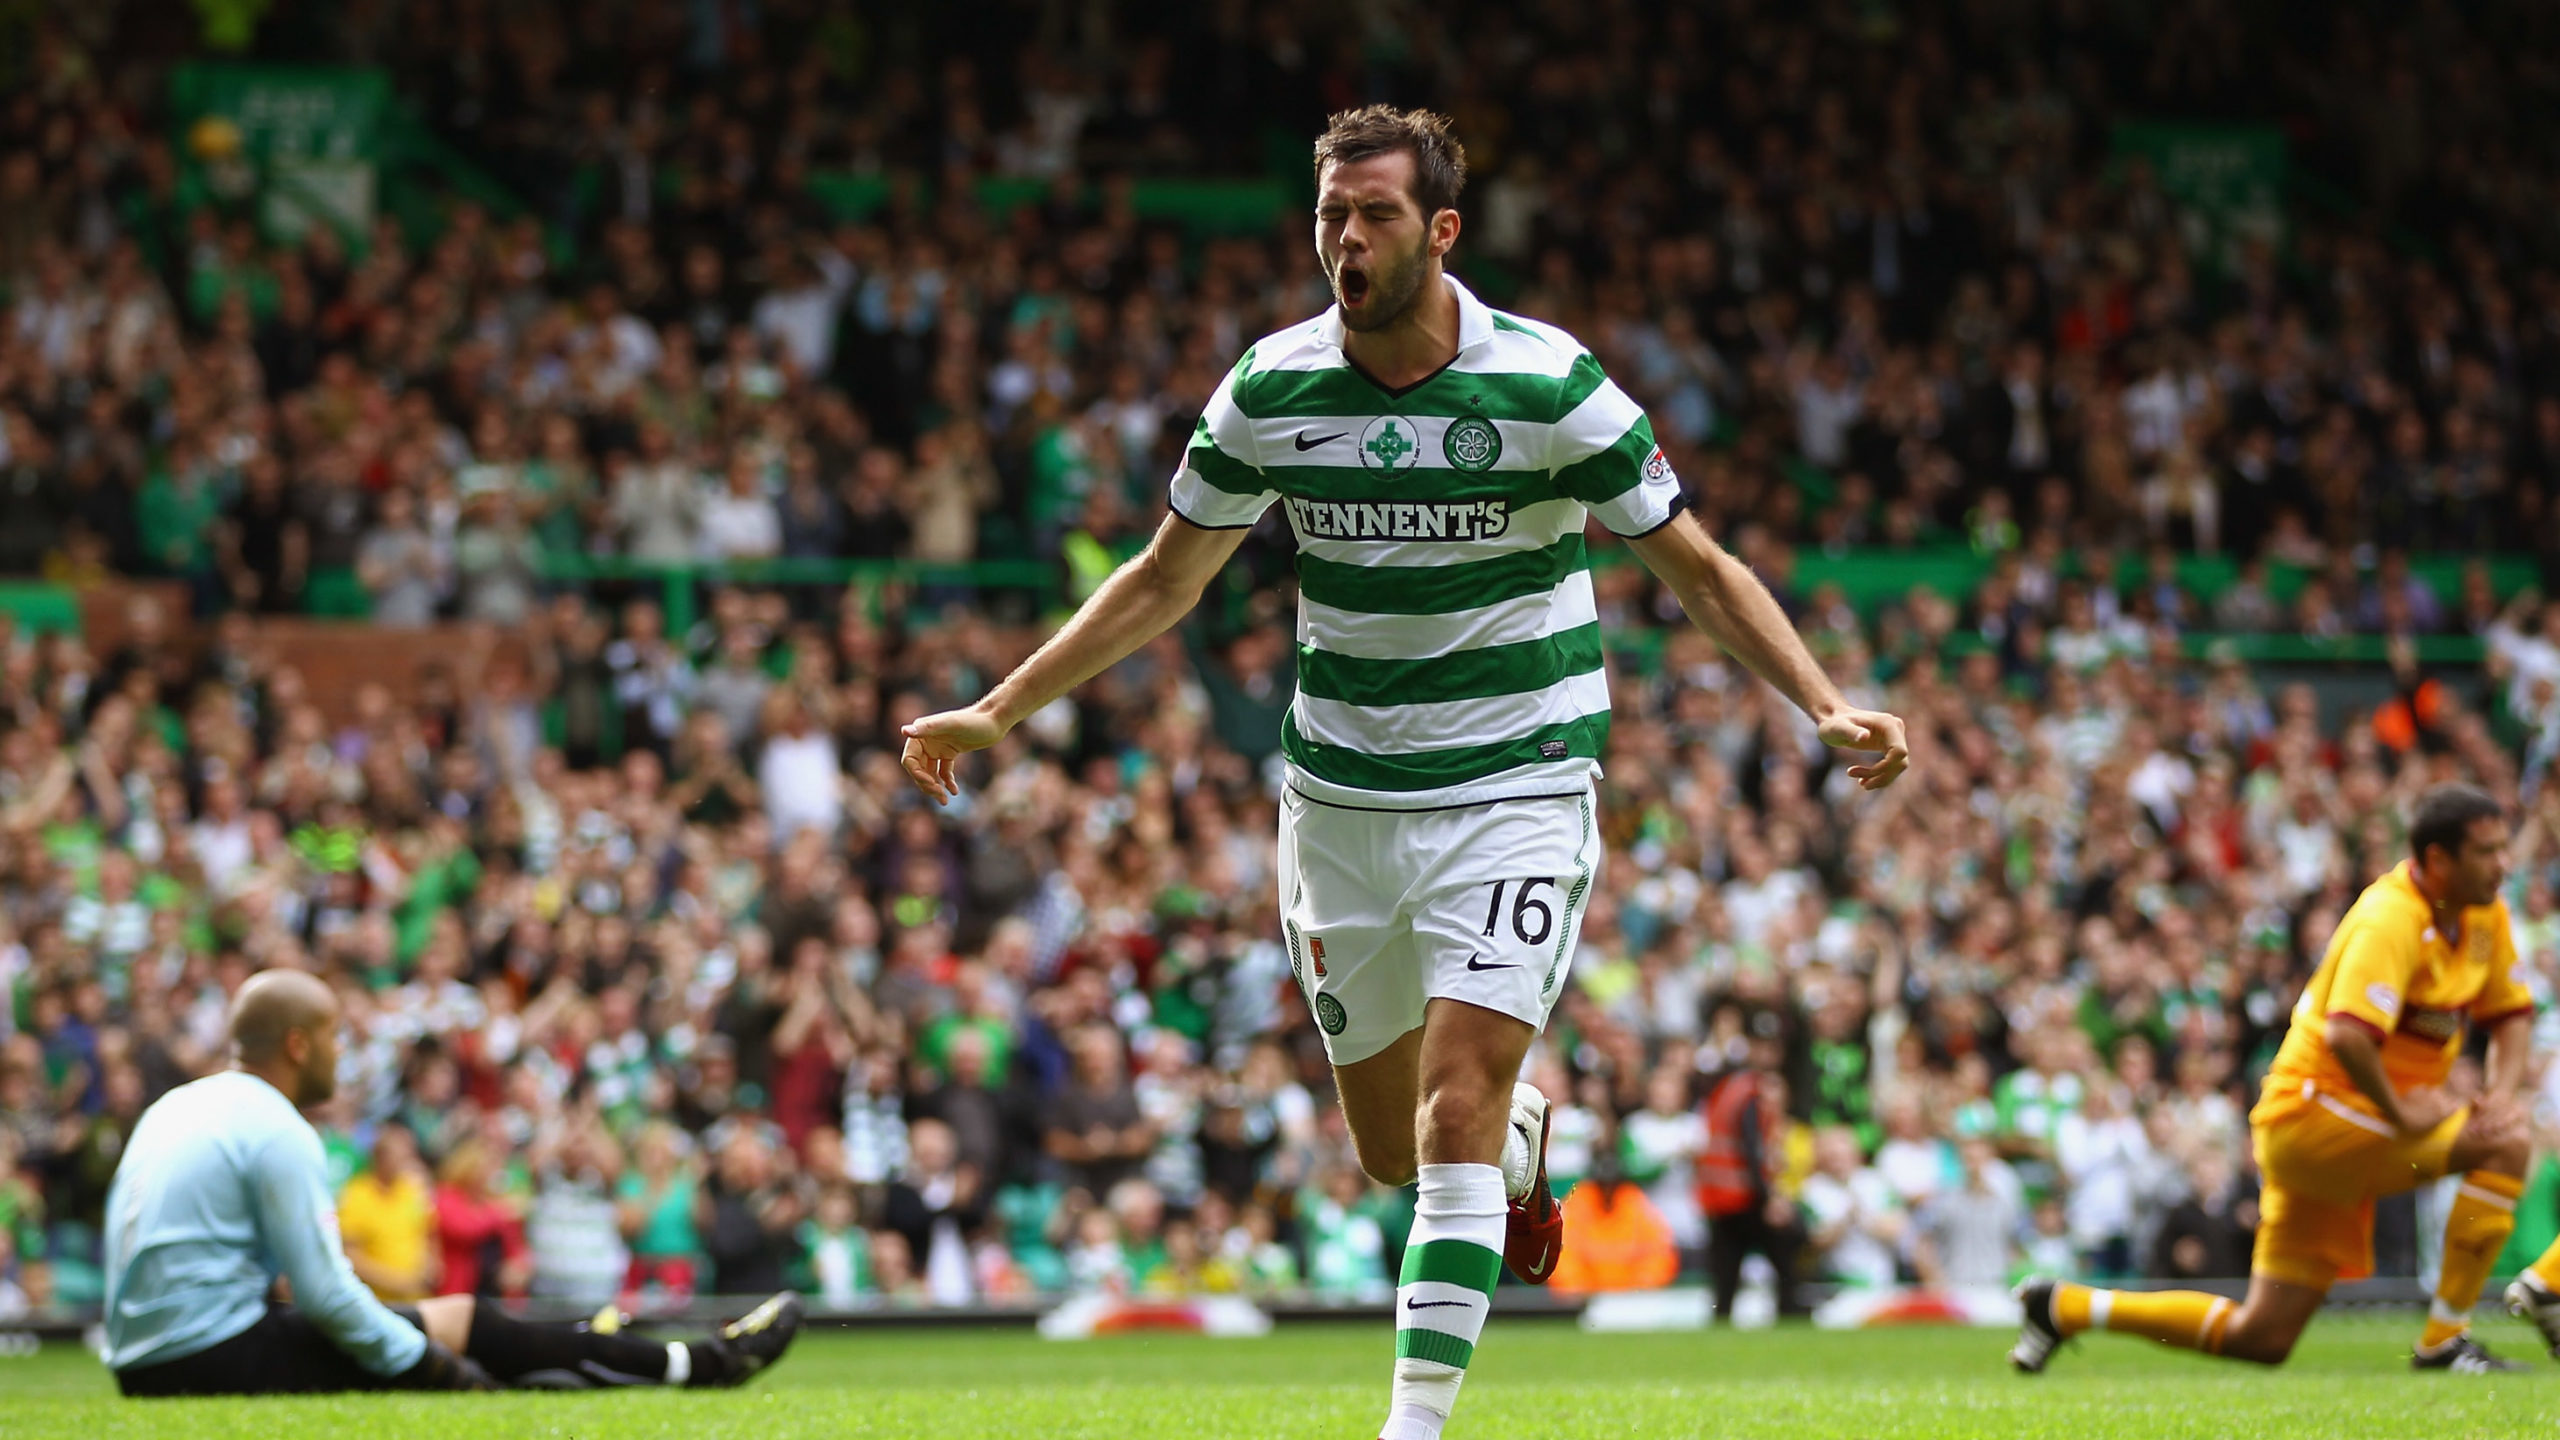 Petrov, Ledley, Commons and more set for Celtic renaissance; how to watch